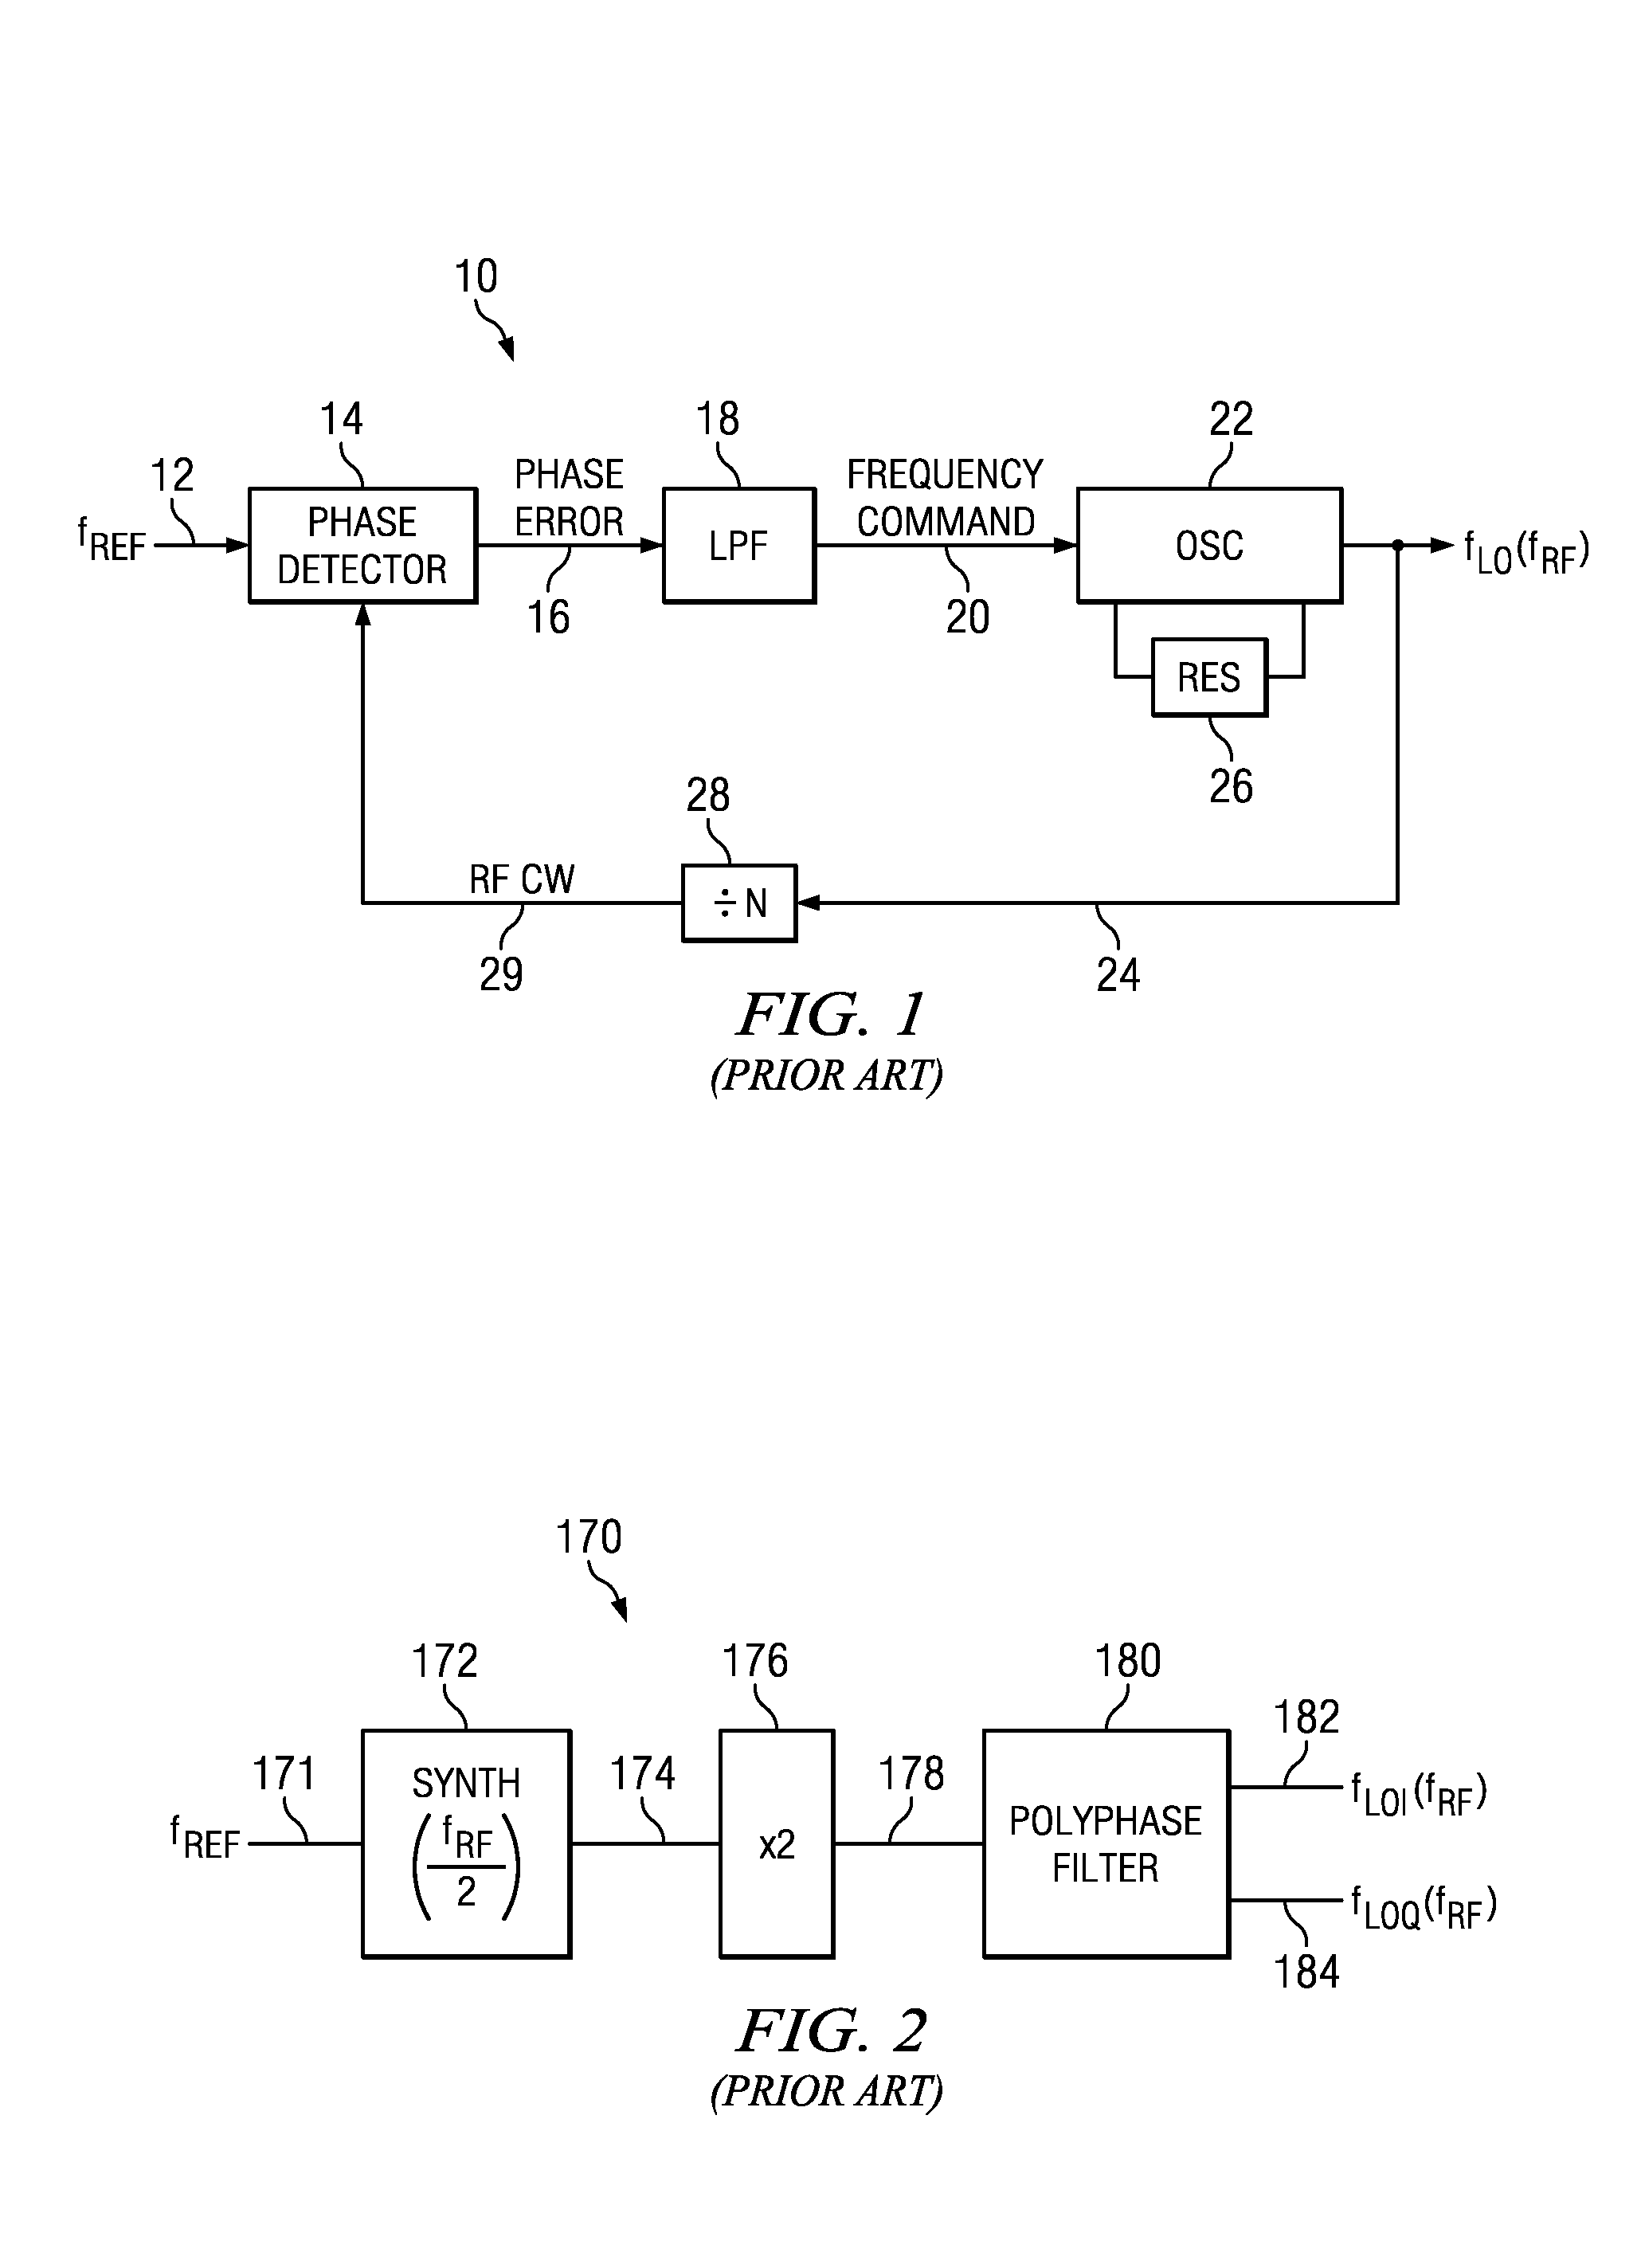 Local oscillator with non-harmonic ratio between oscillator and RF frequencies using digital mixing and weighting functions